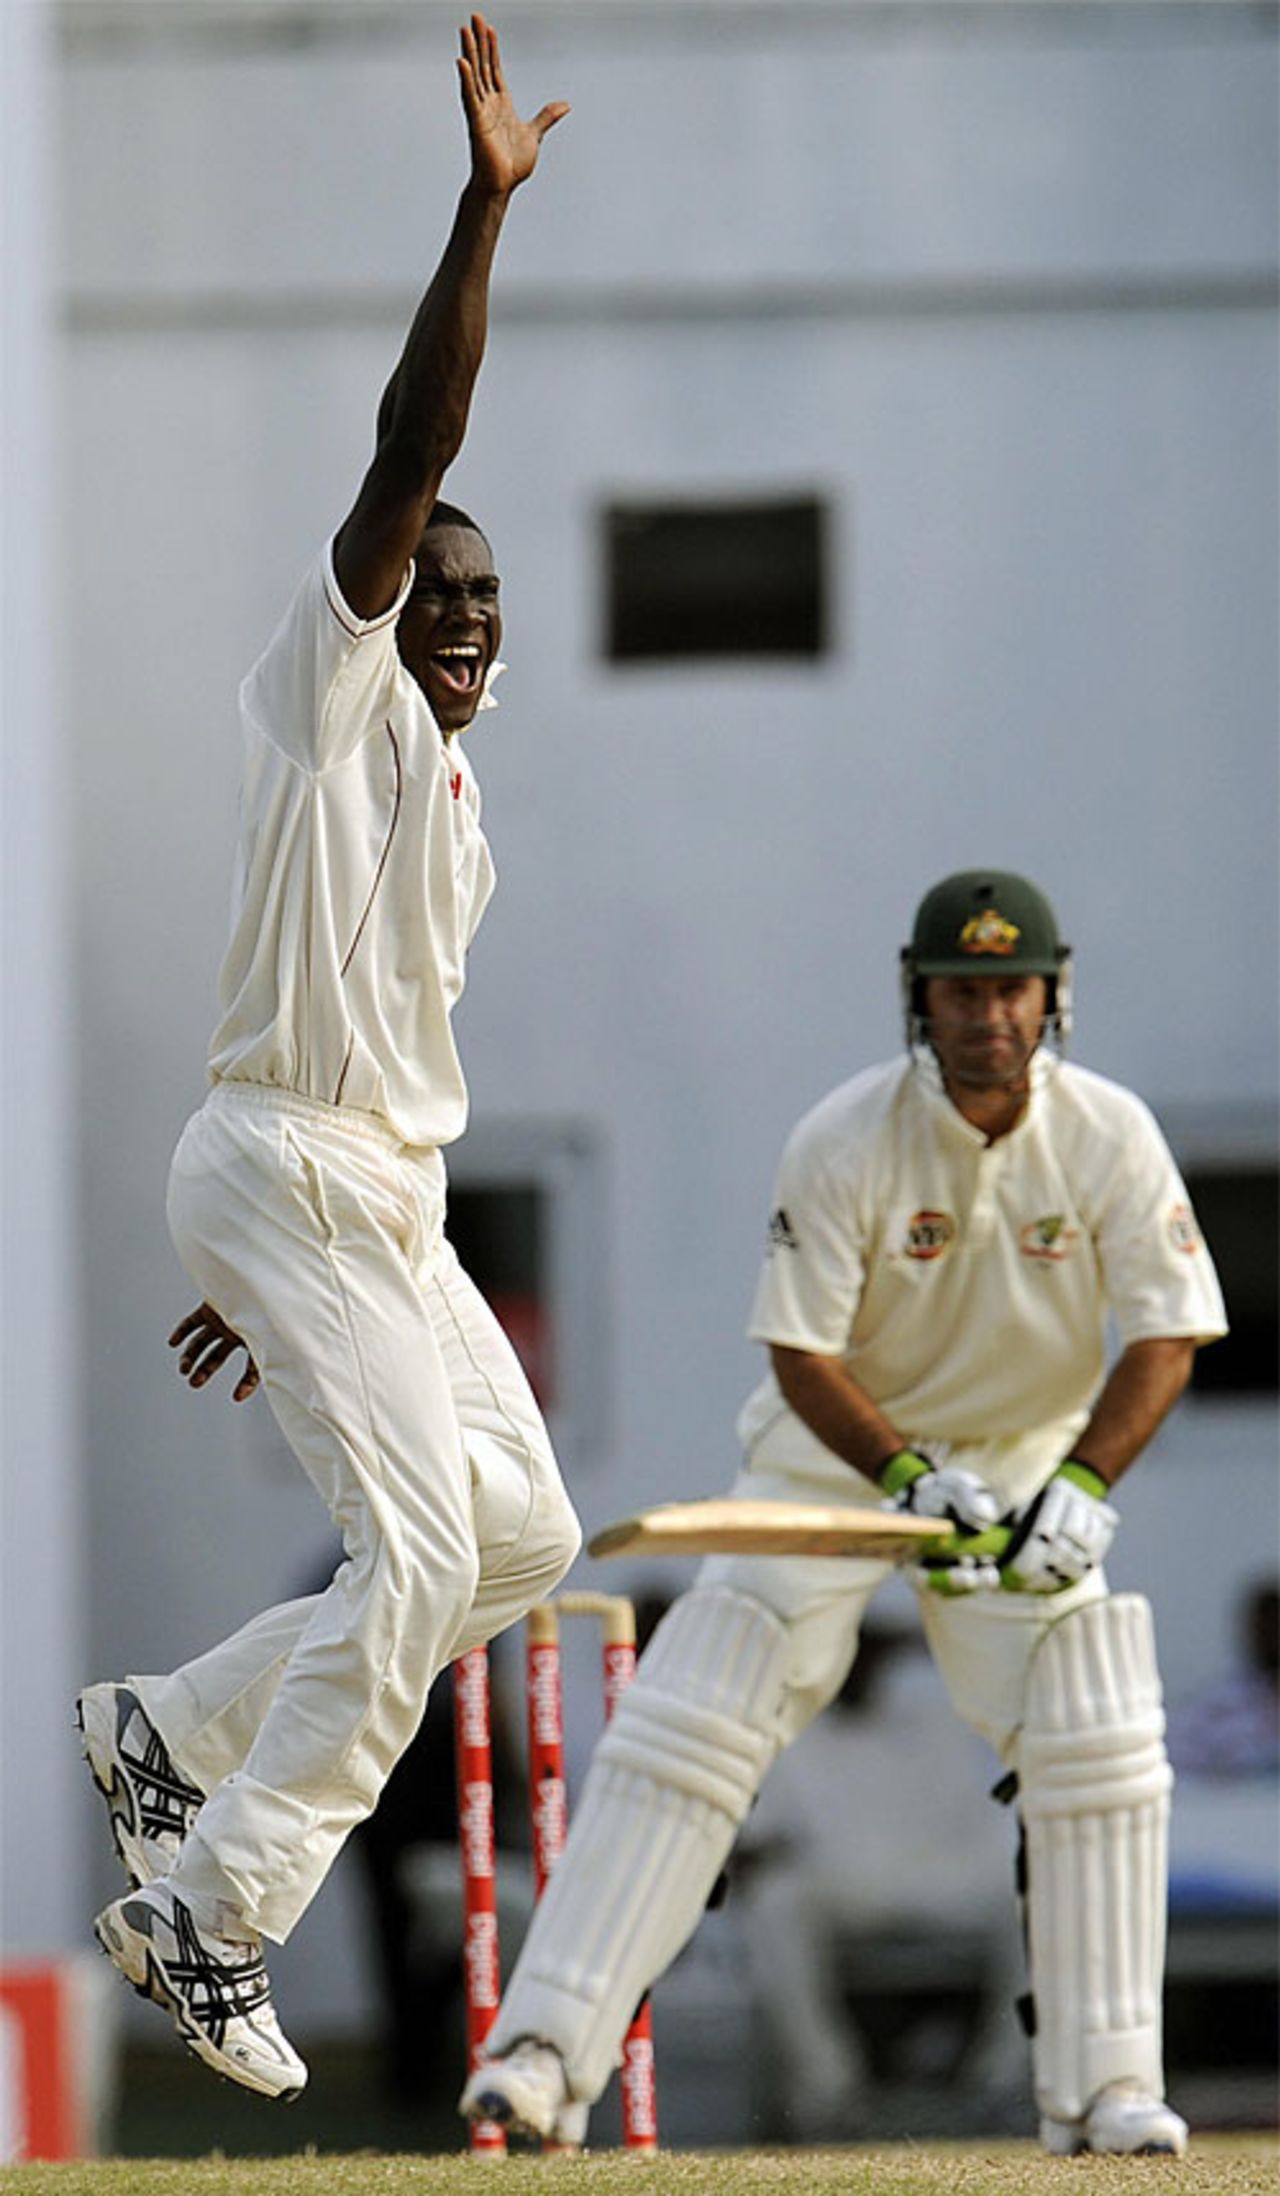 Jerome Taylor is delighted to have dismissed Ricky Ponting, West Indies v Australia, 2nd Test, Antigua, June 2, 2008